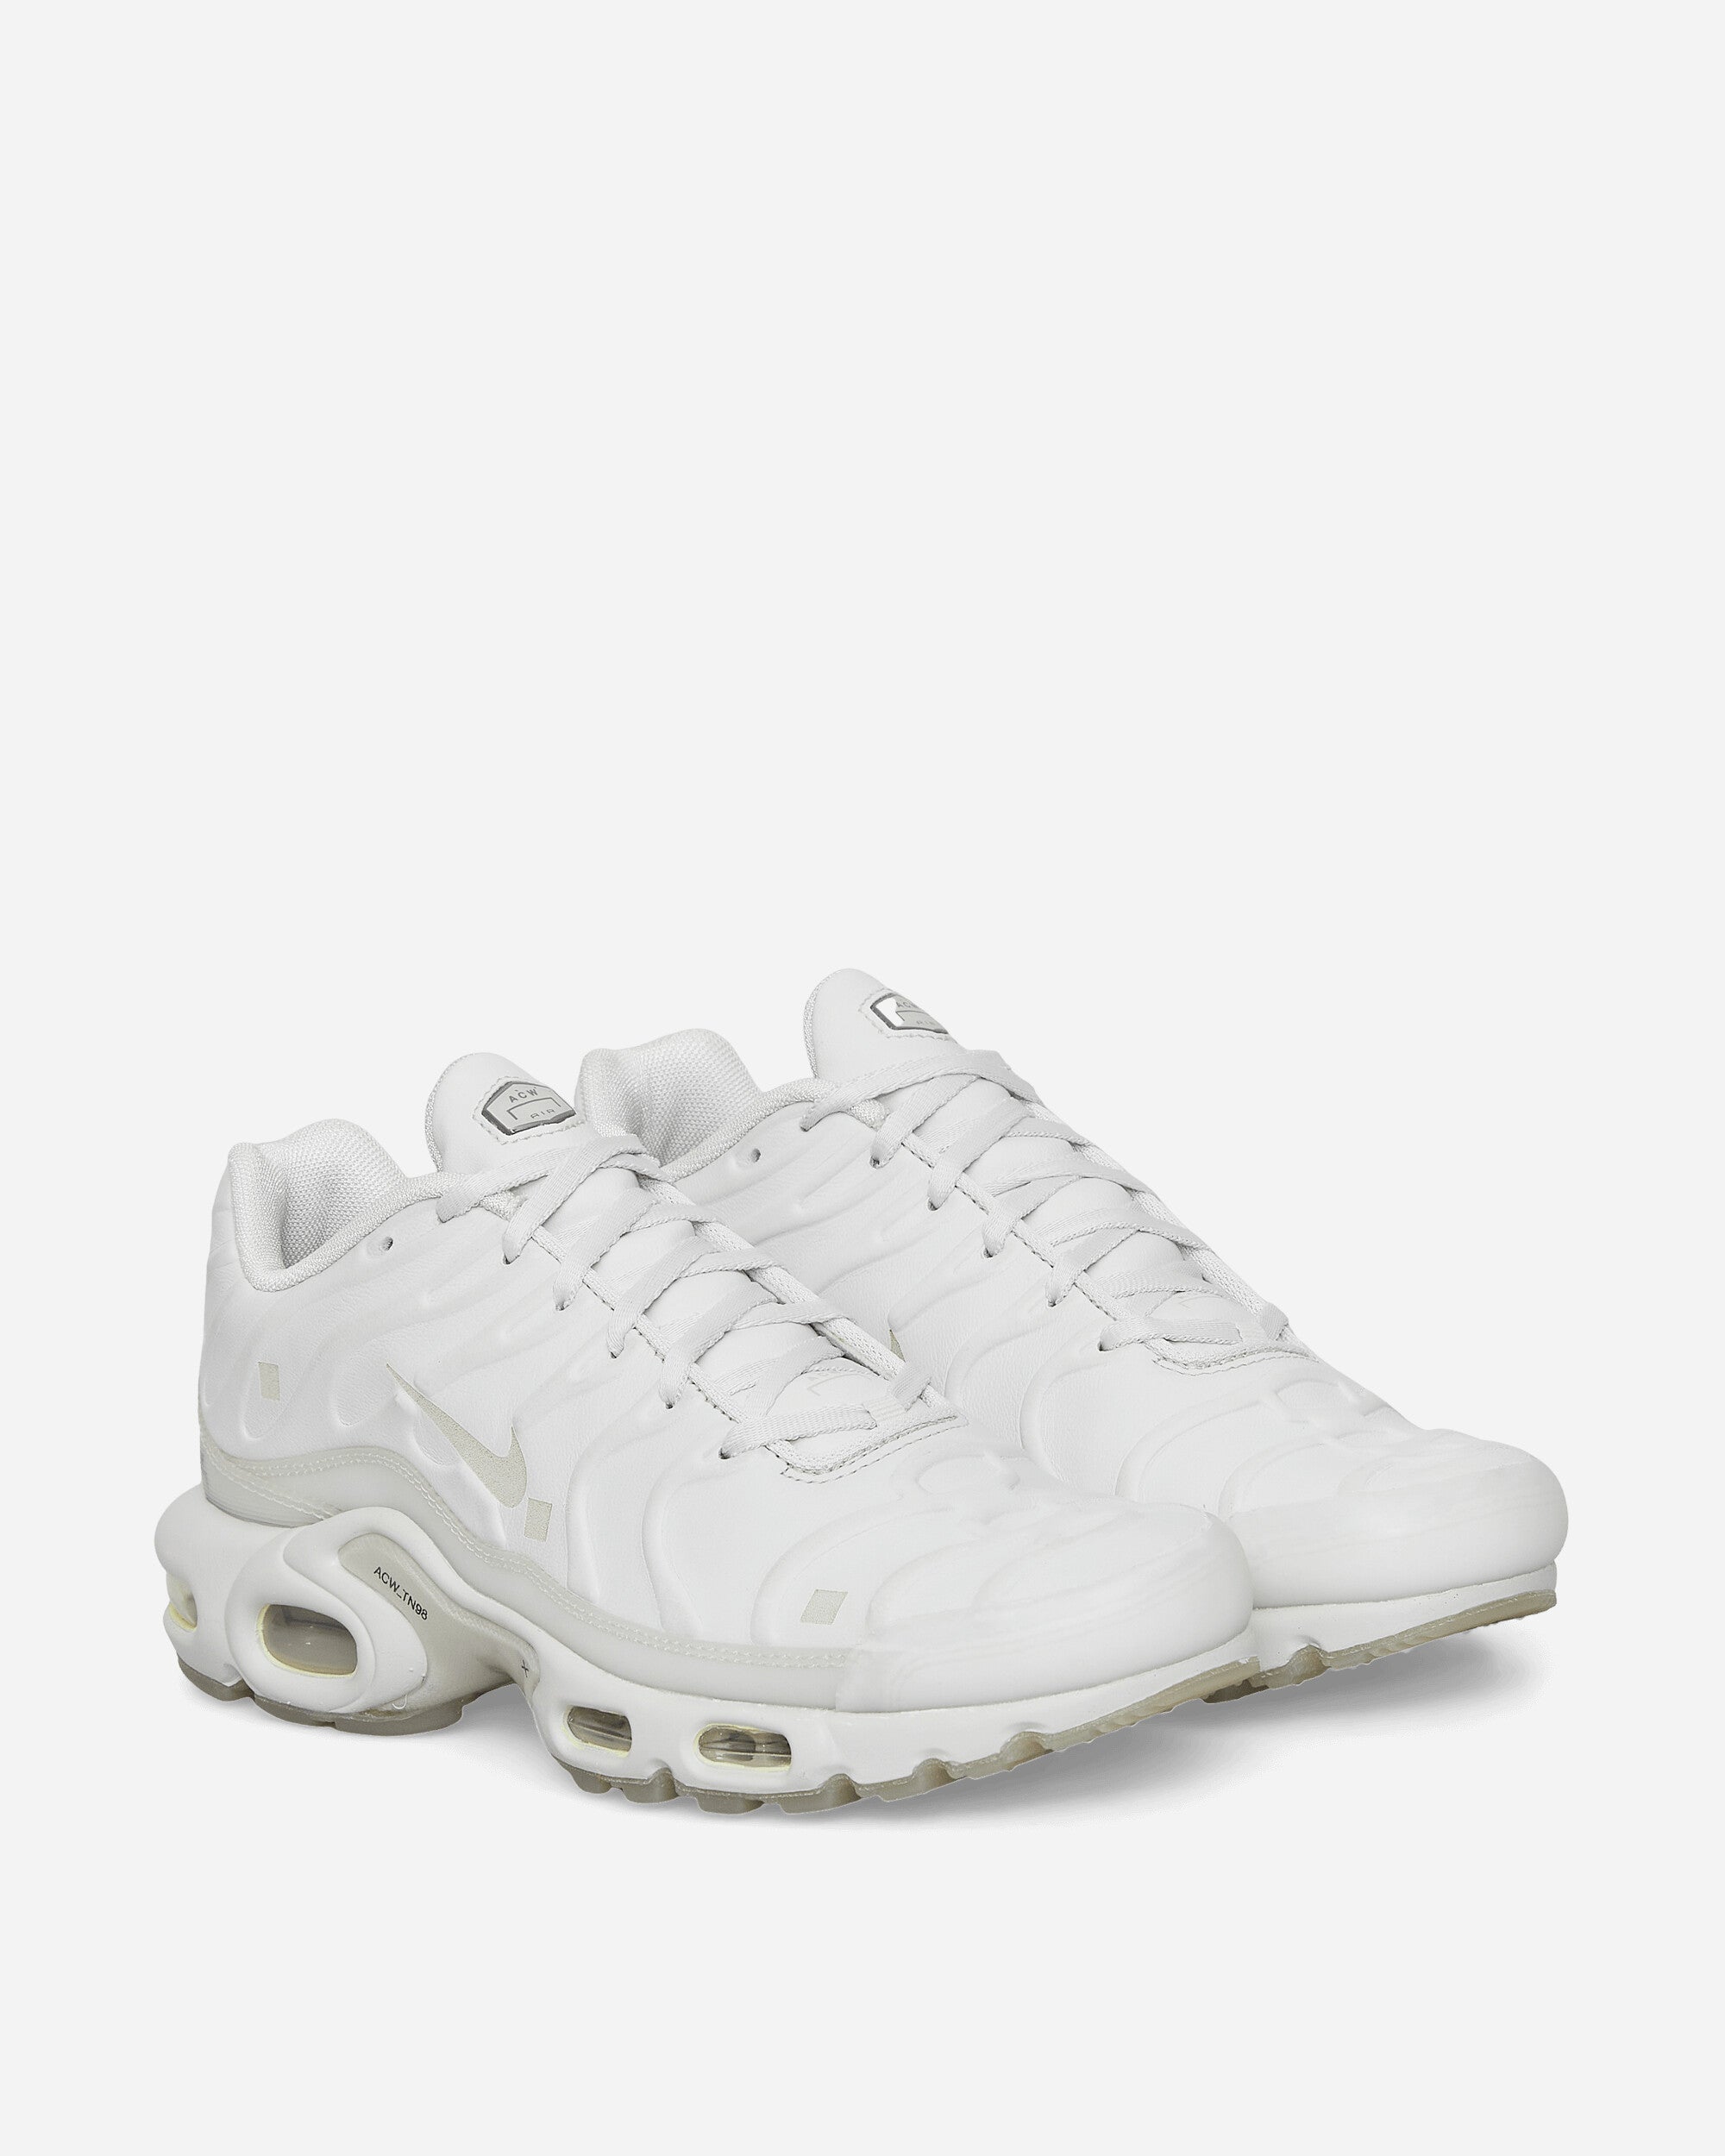 A-COLD-WALL* Air Max Plus Sneakers Stone